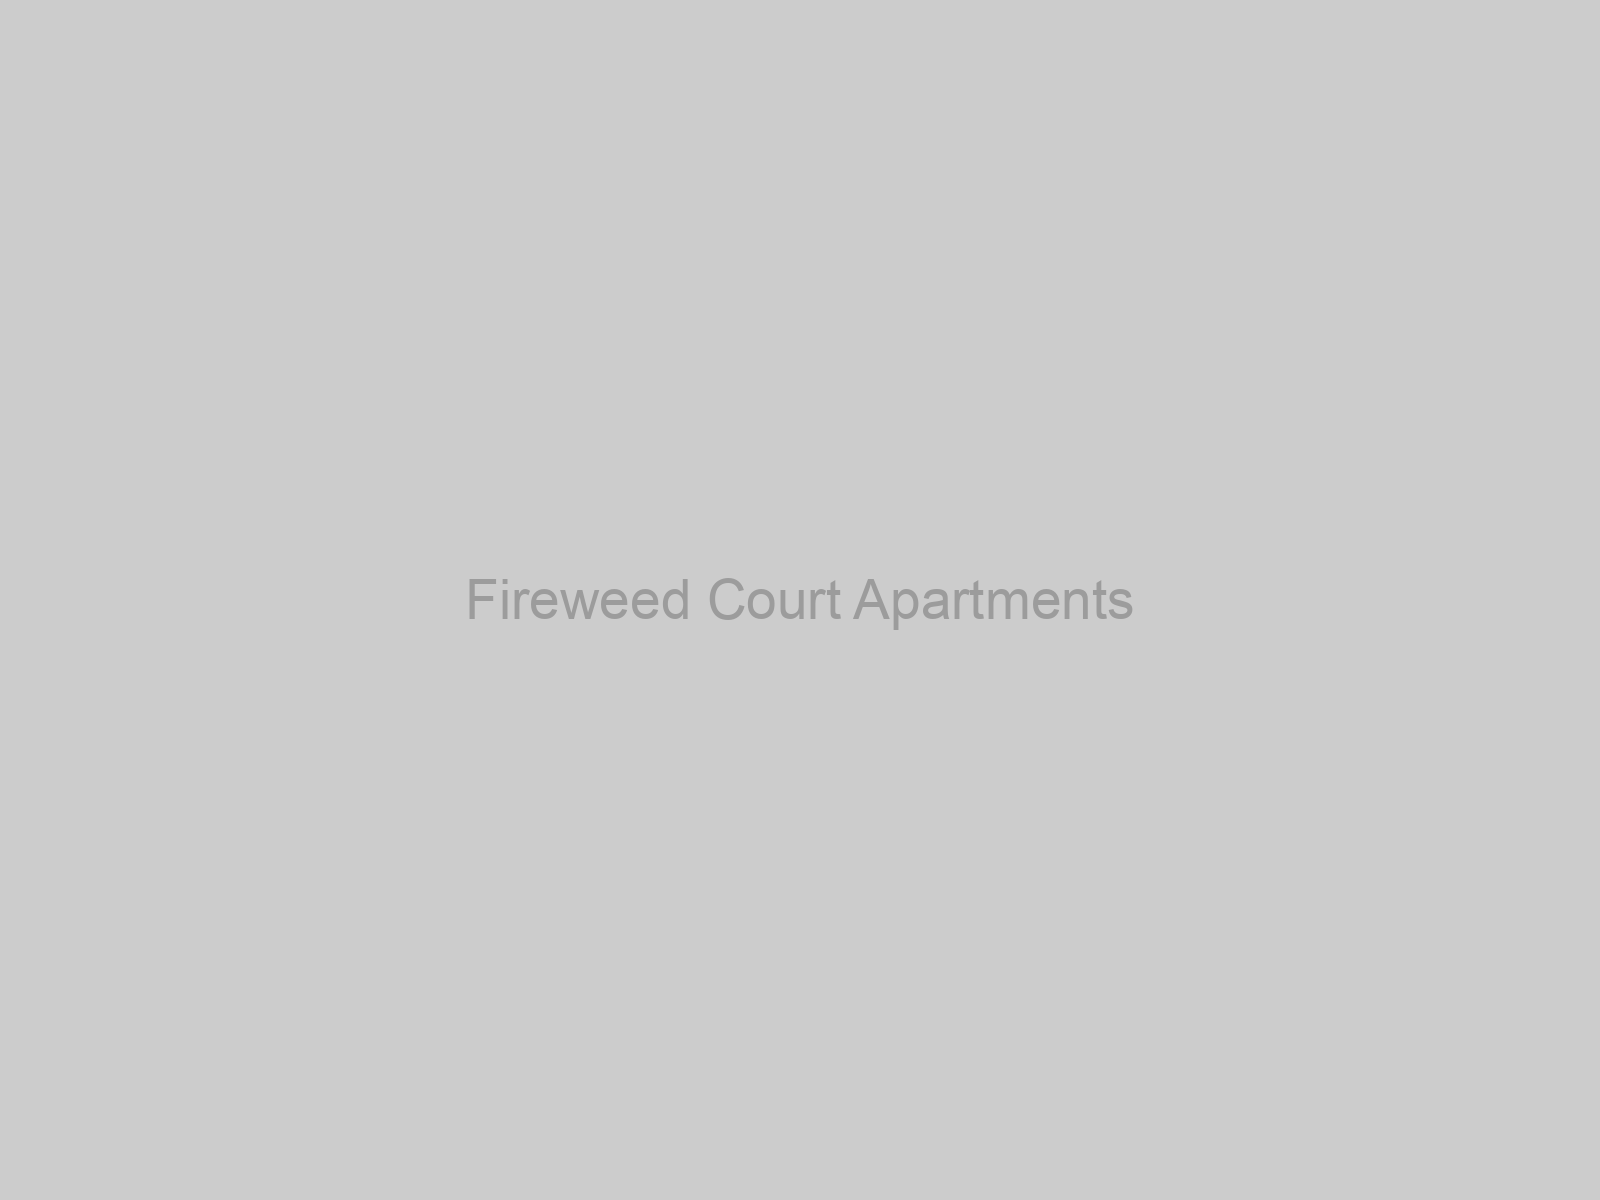 Fireweed Court Apartments